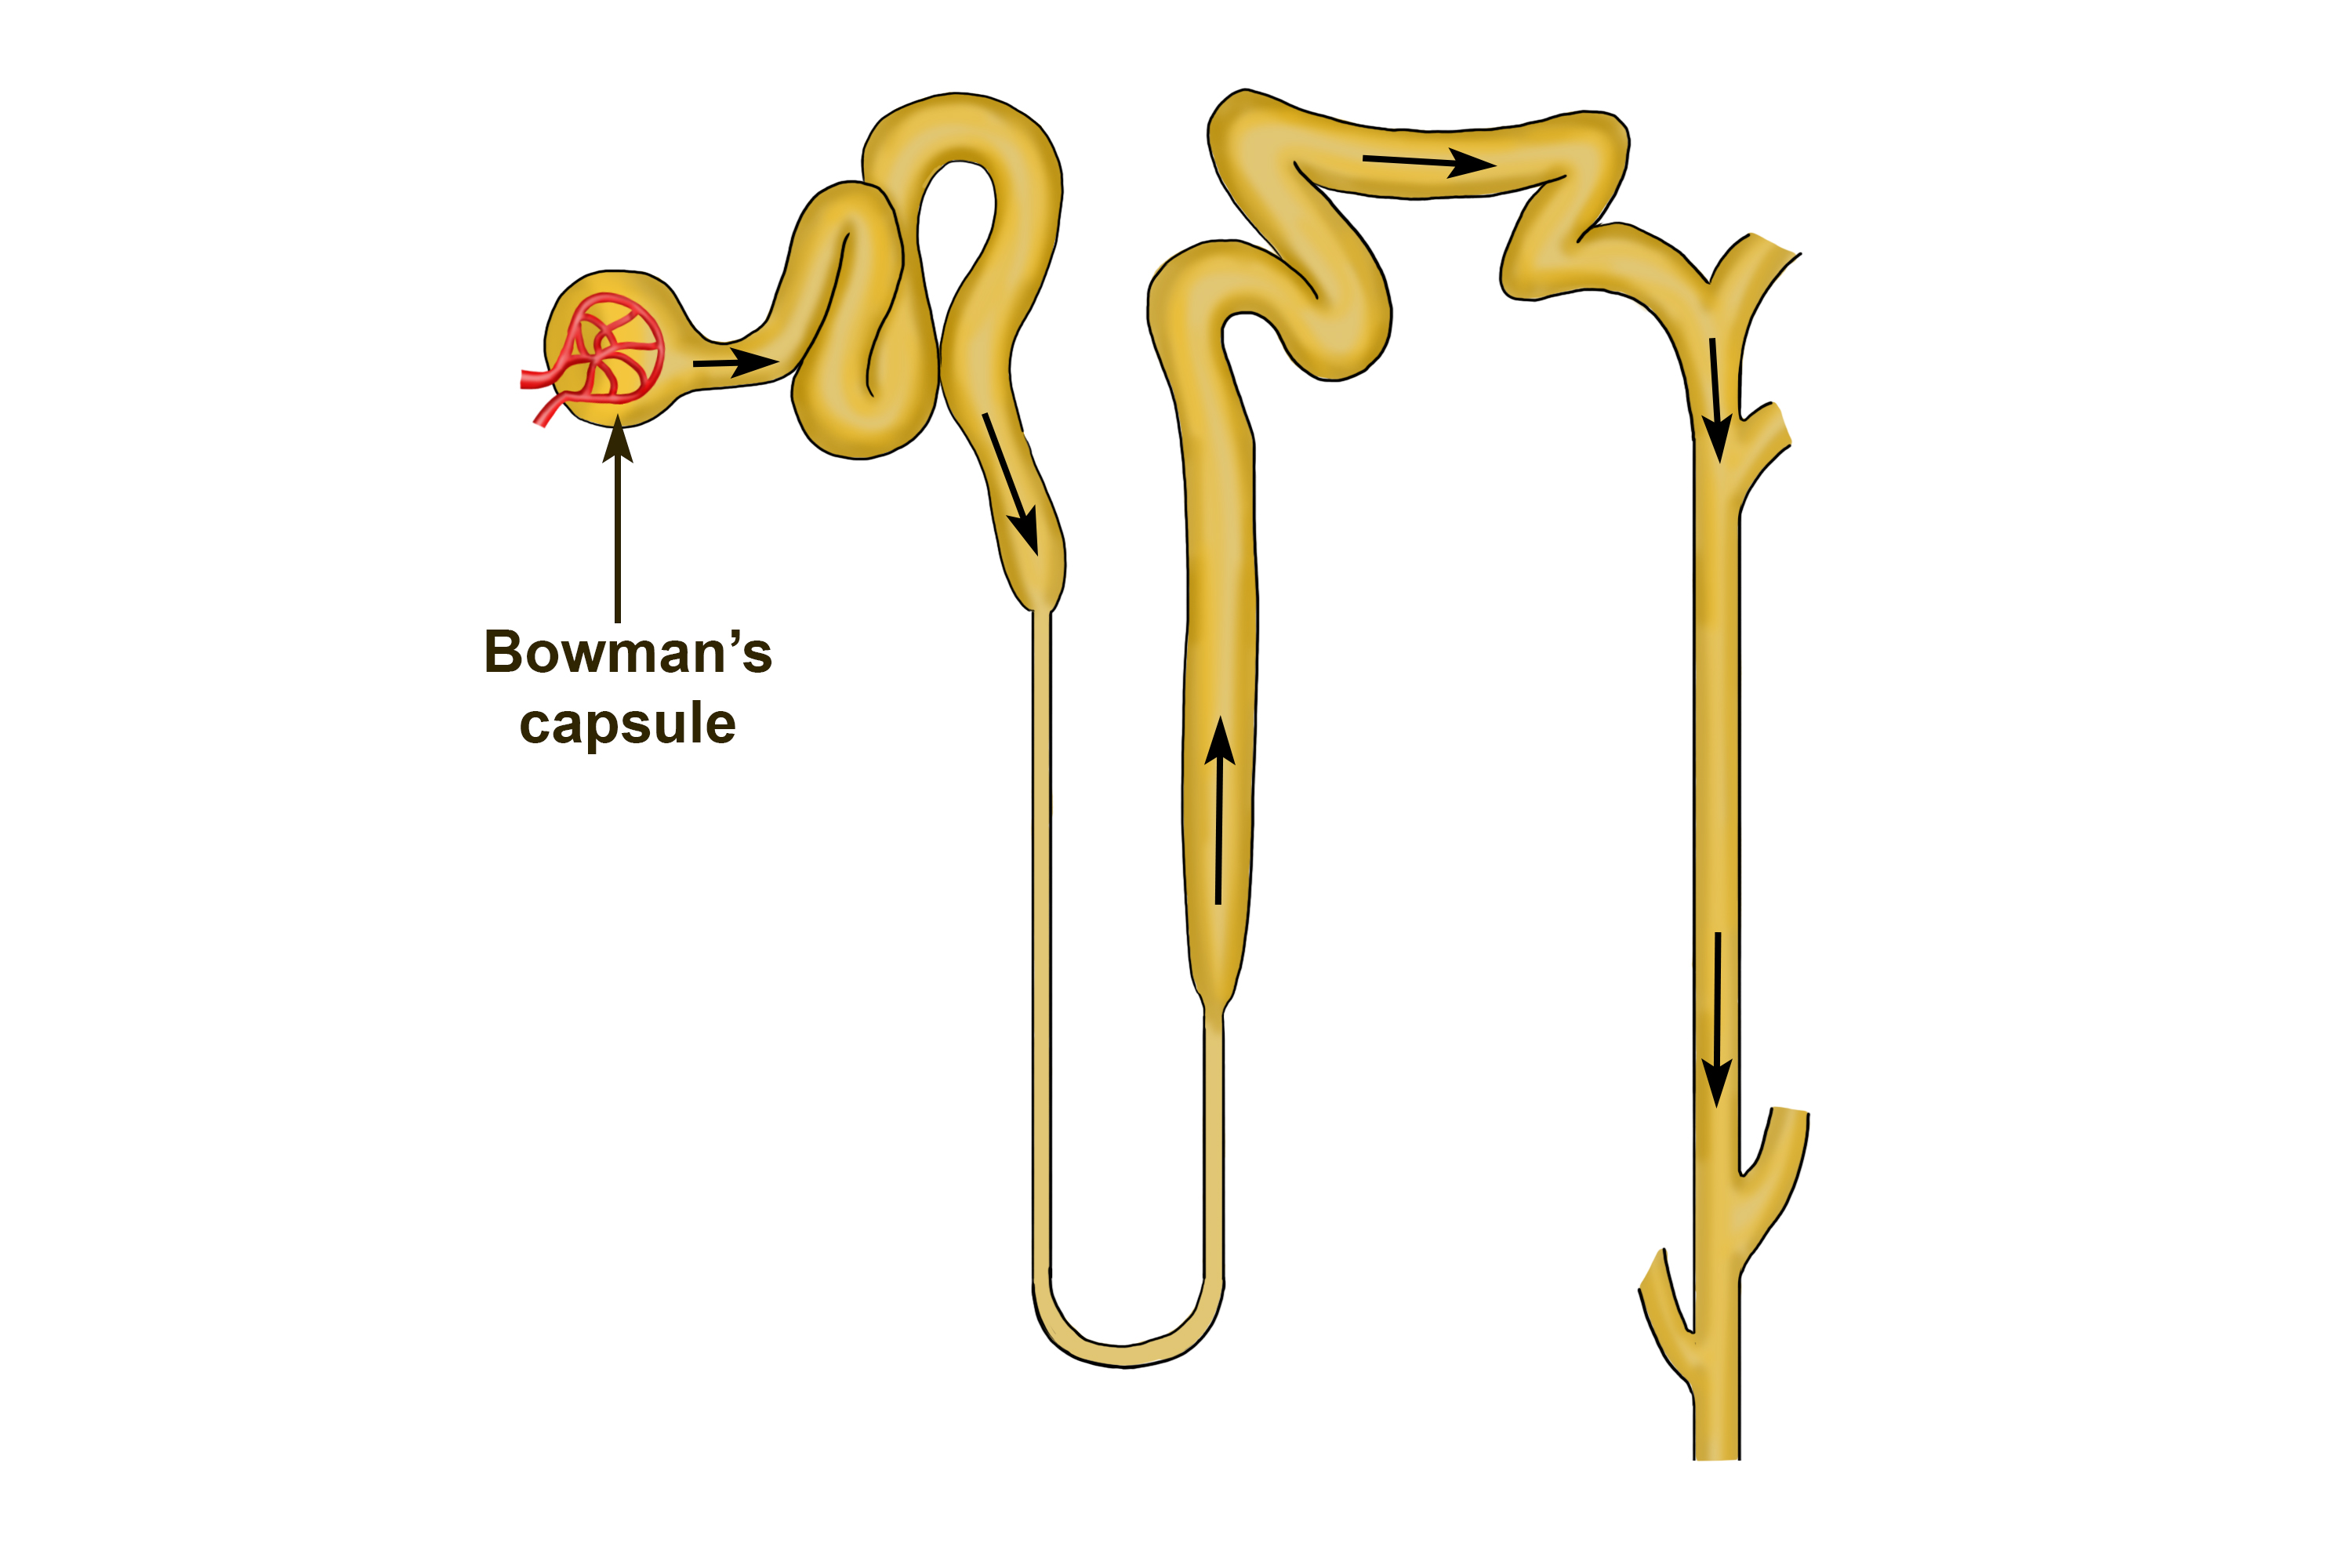 The bowman's capsule is the first part of nephron and tubule